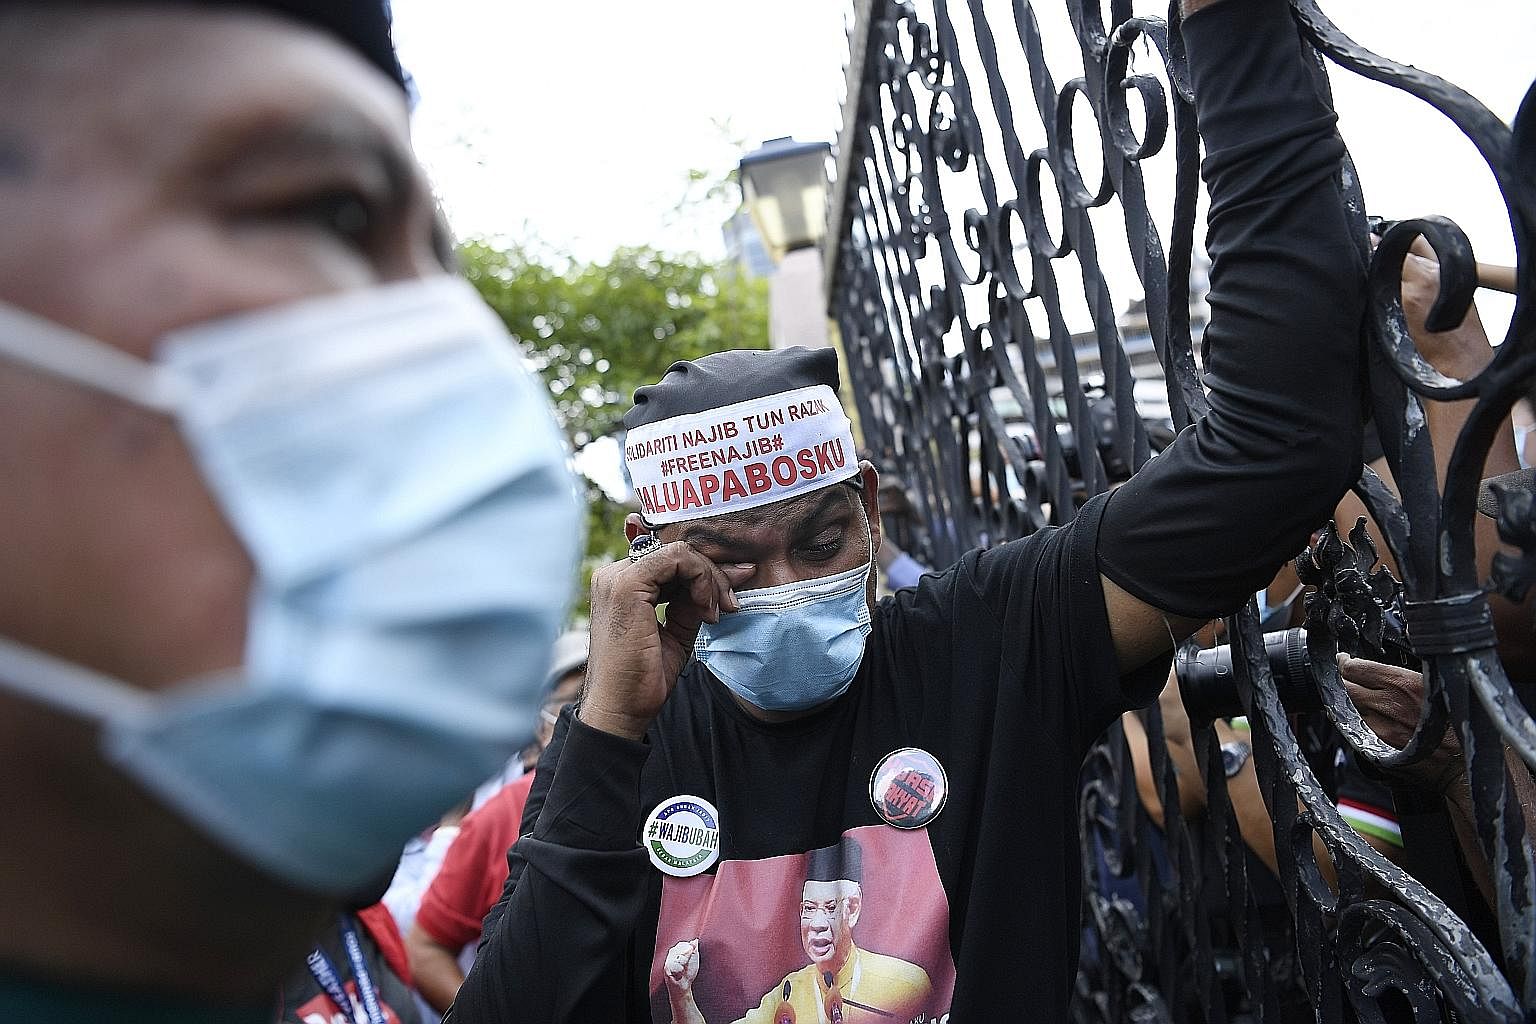 A Najib supporter reacting to the news of the court ruling on Tuesday. Hundreds had crowded the High Court compound to support the former premier. Though Najib still faces another four criminal trials, he remains a popular figure in Malaysia, with hi